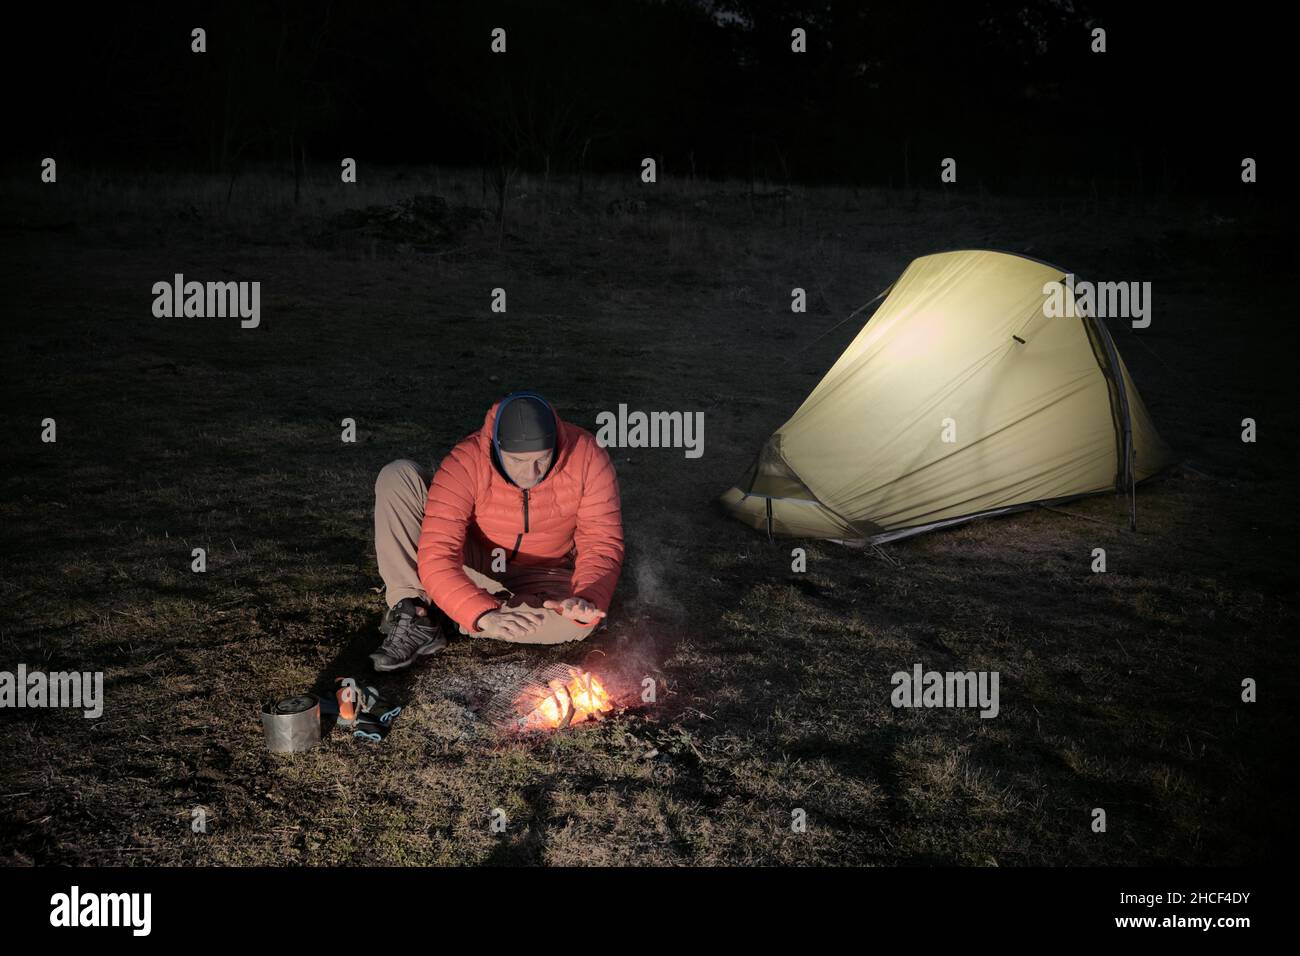 wild camping and survival skills in outdoor activity a man heats hands on camp fire sitting nearby the illuminated tent Stock Photo